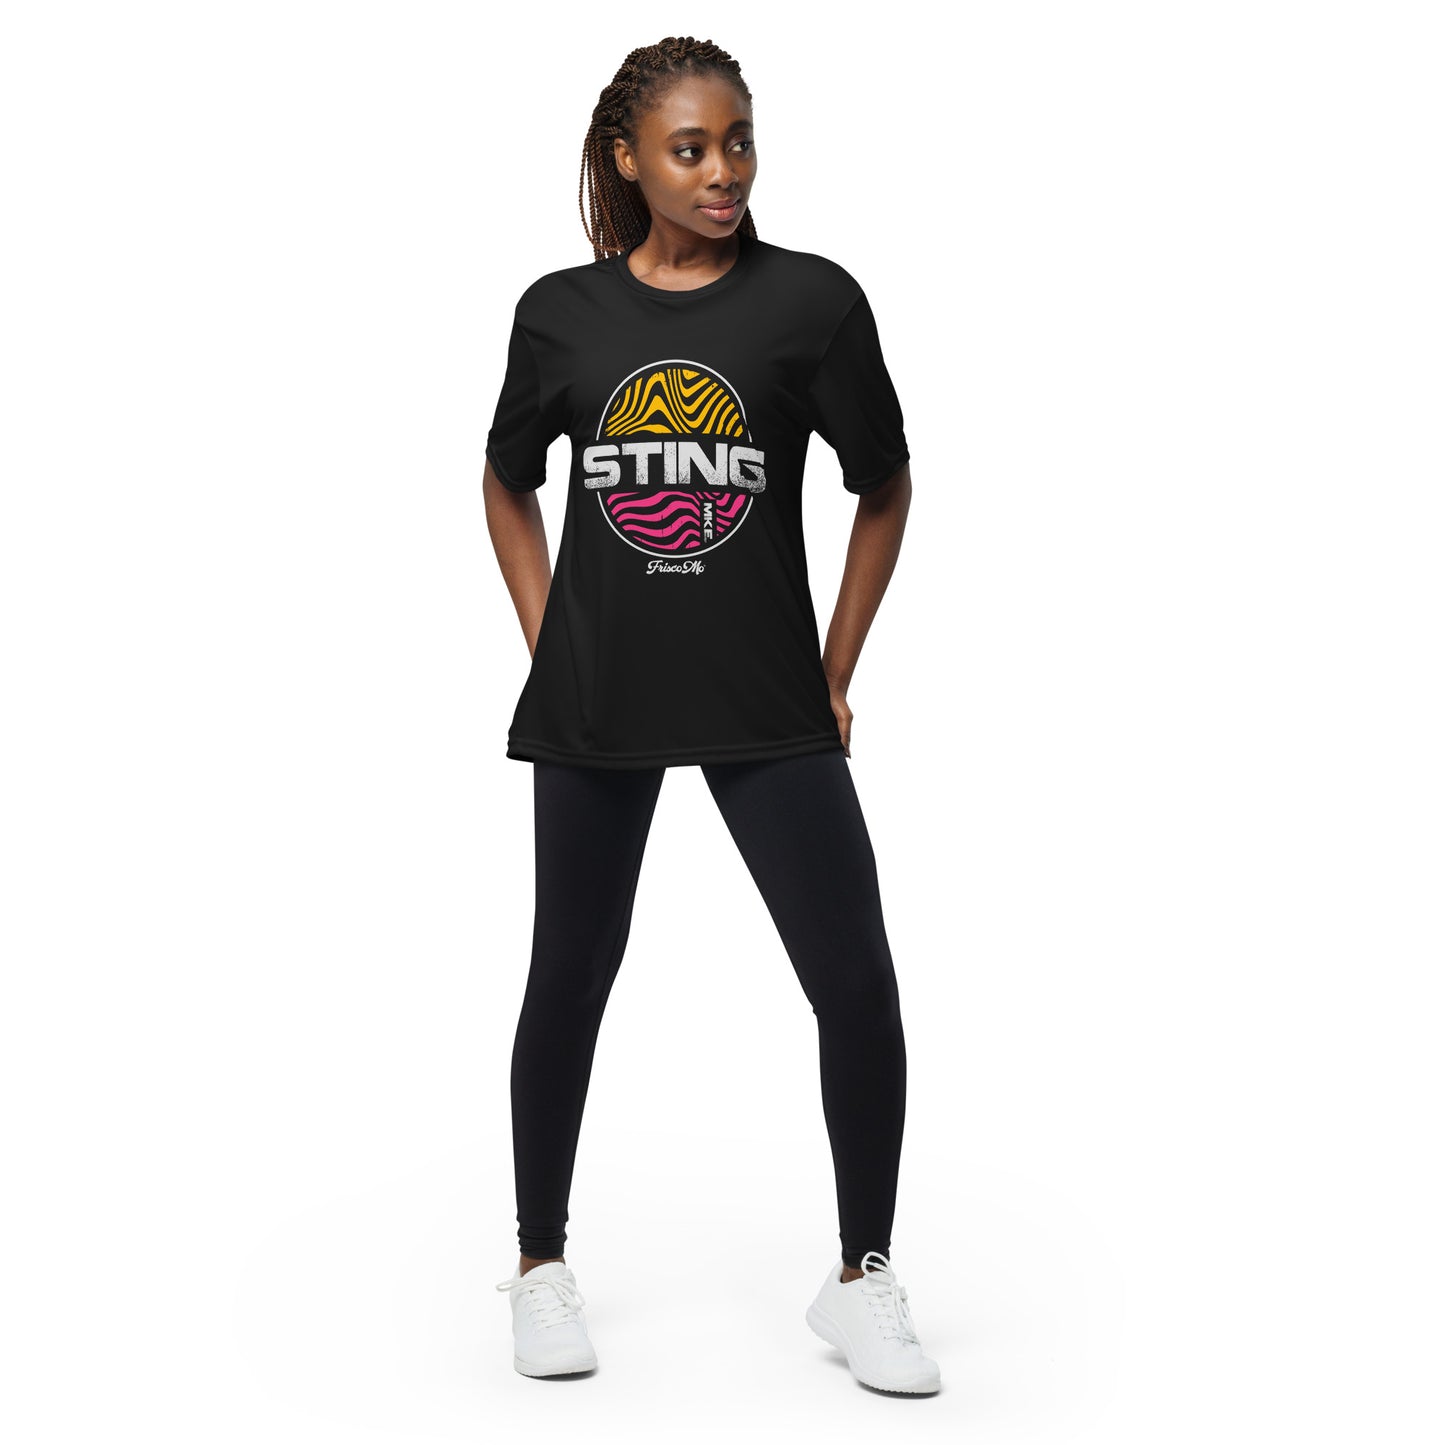 Sting Off the Wall Performance Tee